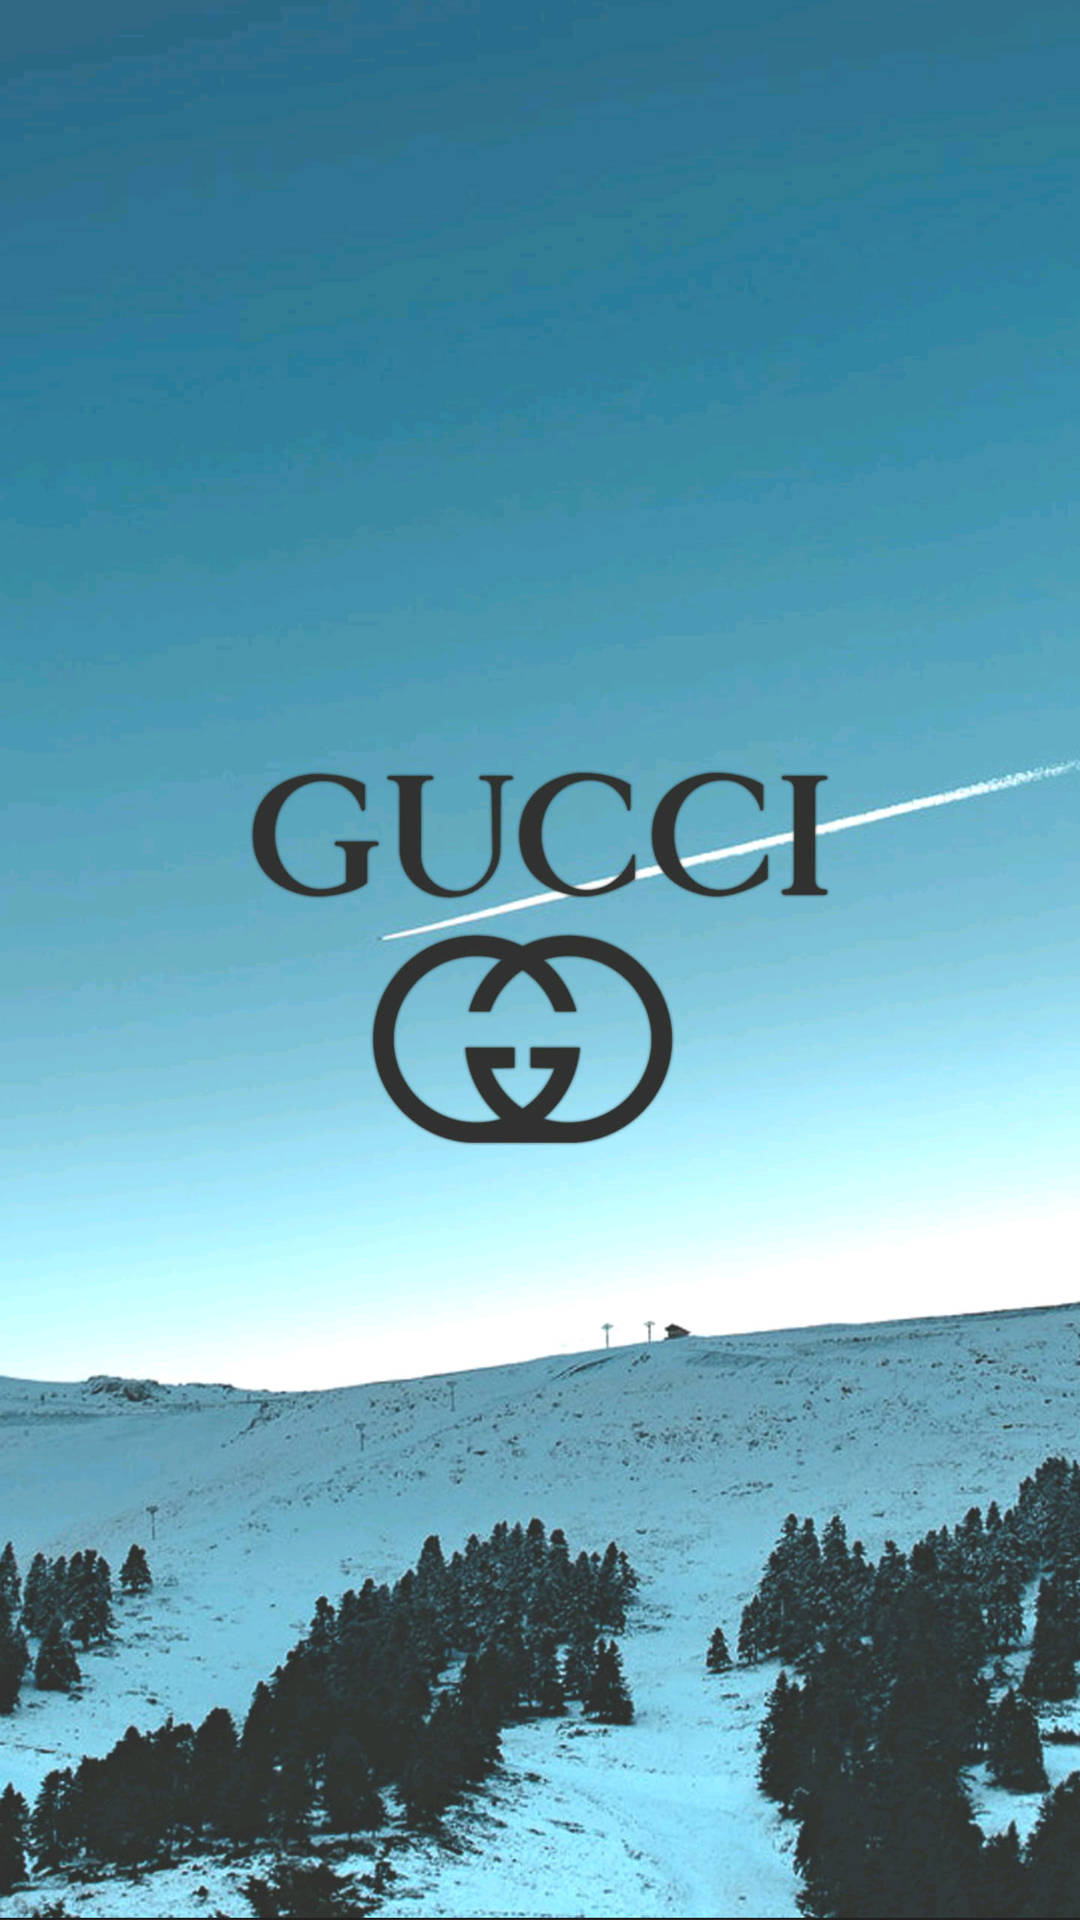 Snowy Gucci Iphone Background Wallpaper